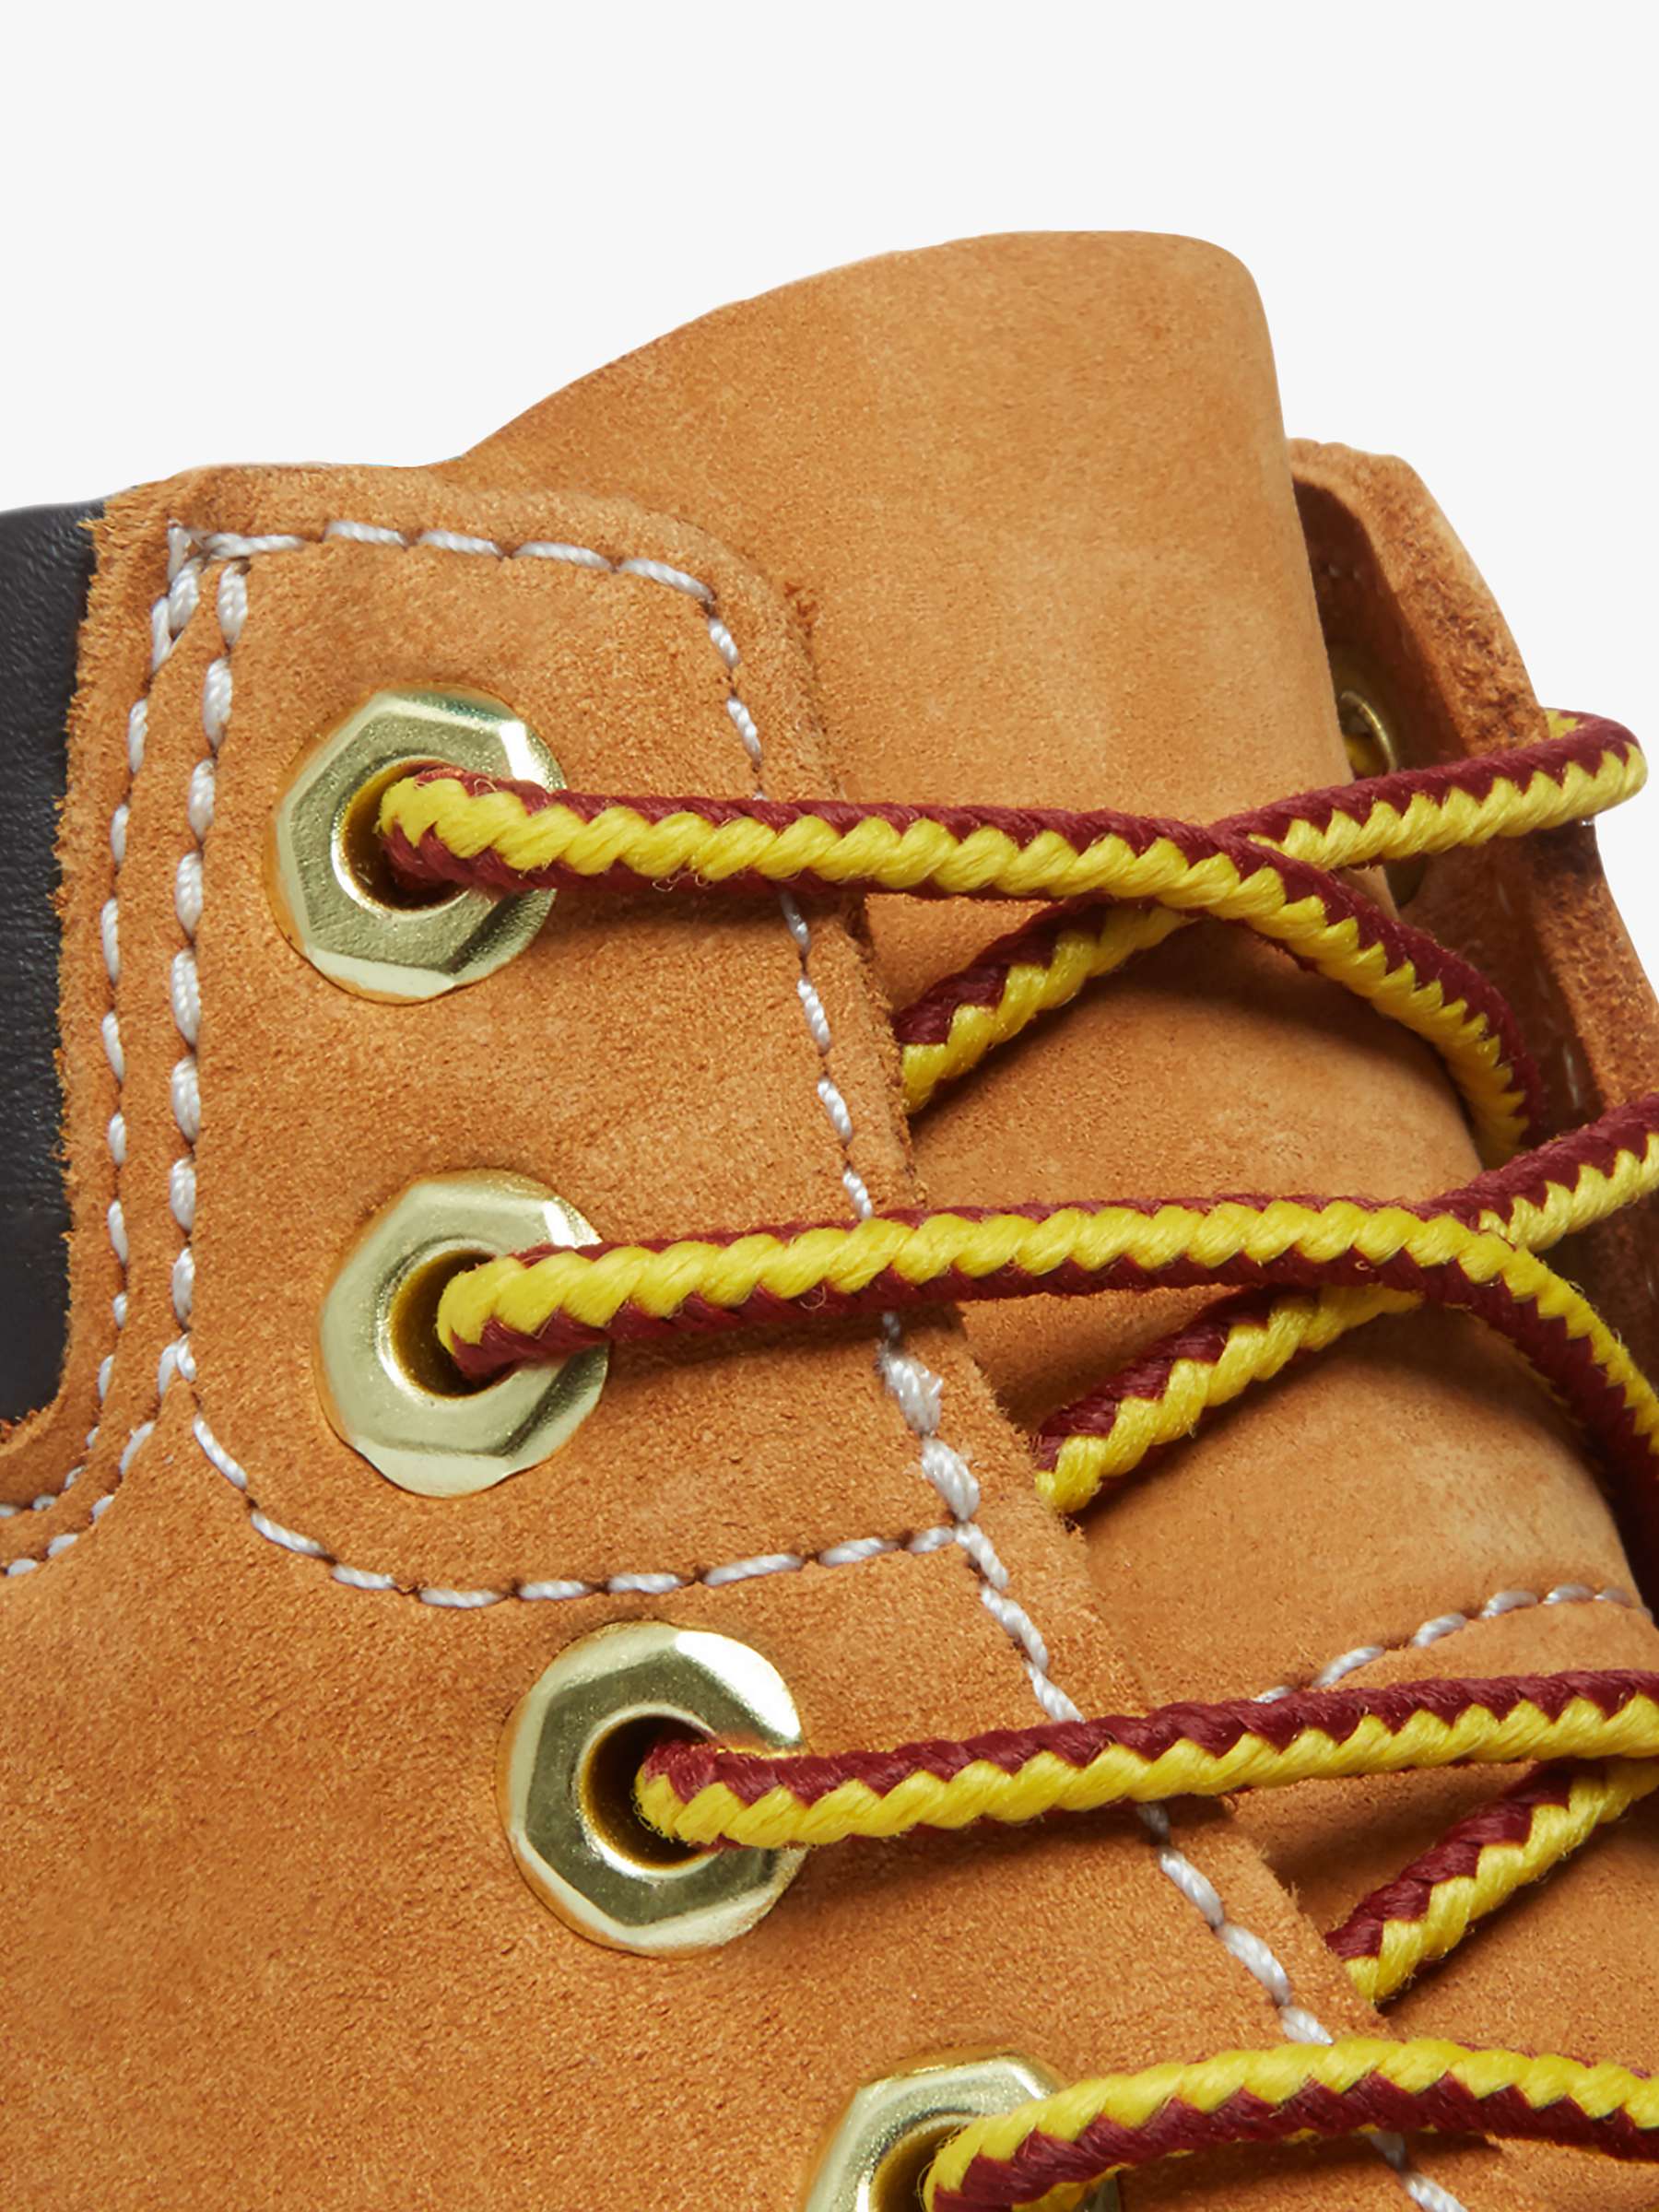 Timberland Kids' Classic 6-Inch Premium Boots, Wheat at John Lewis ...